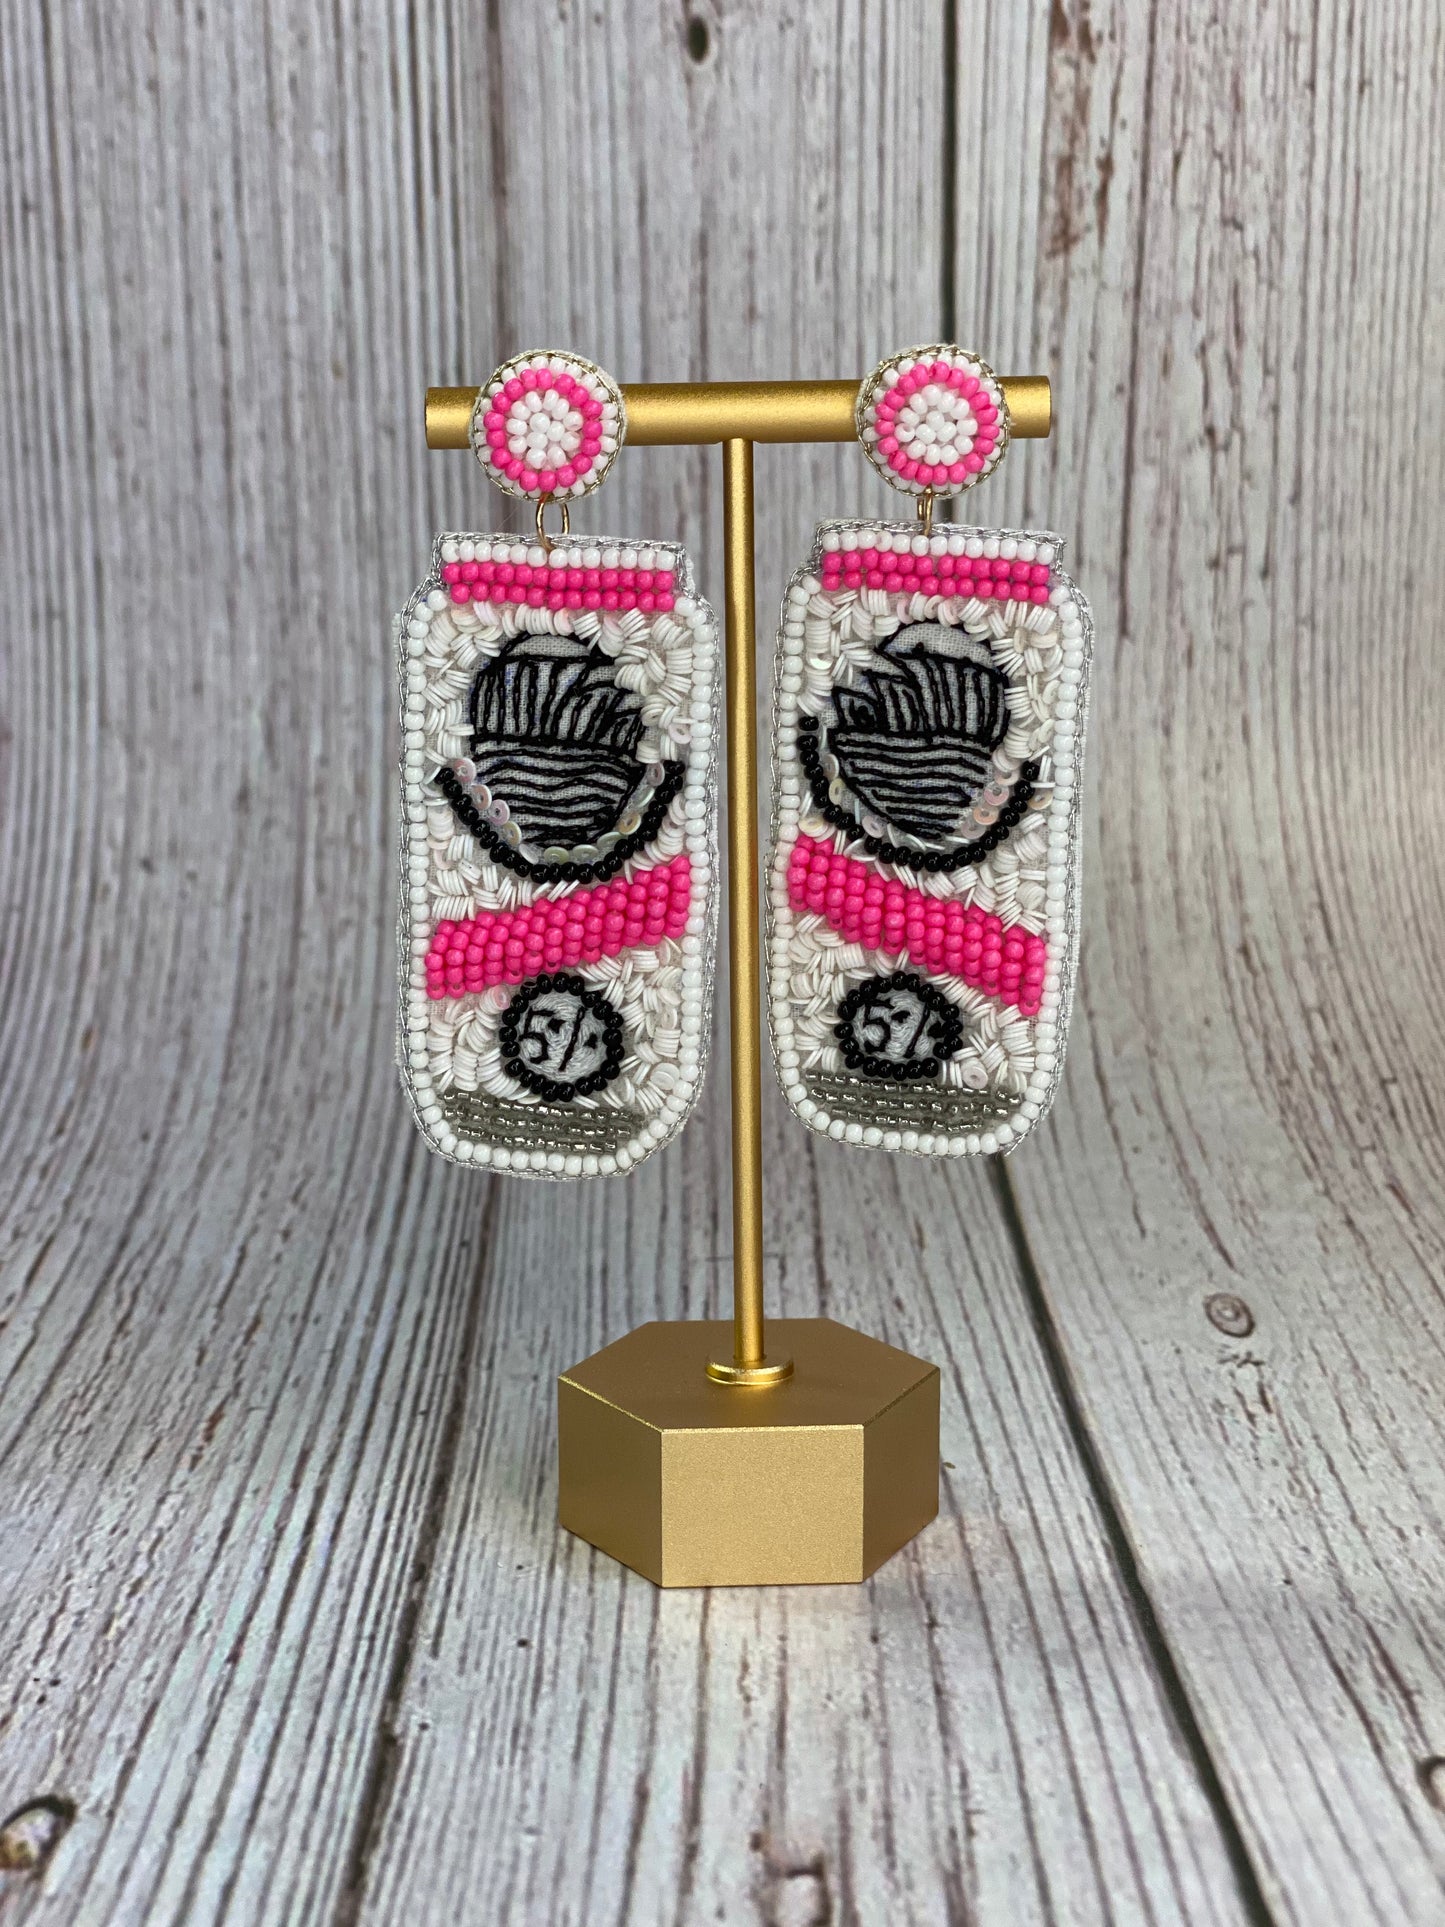 Pink White Claw Earrings